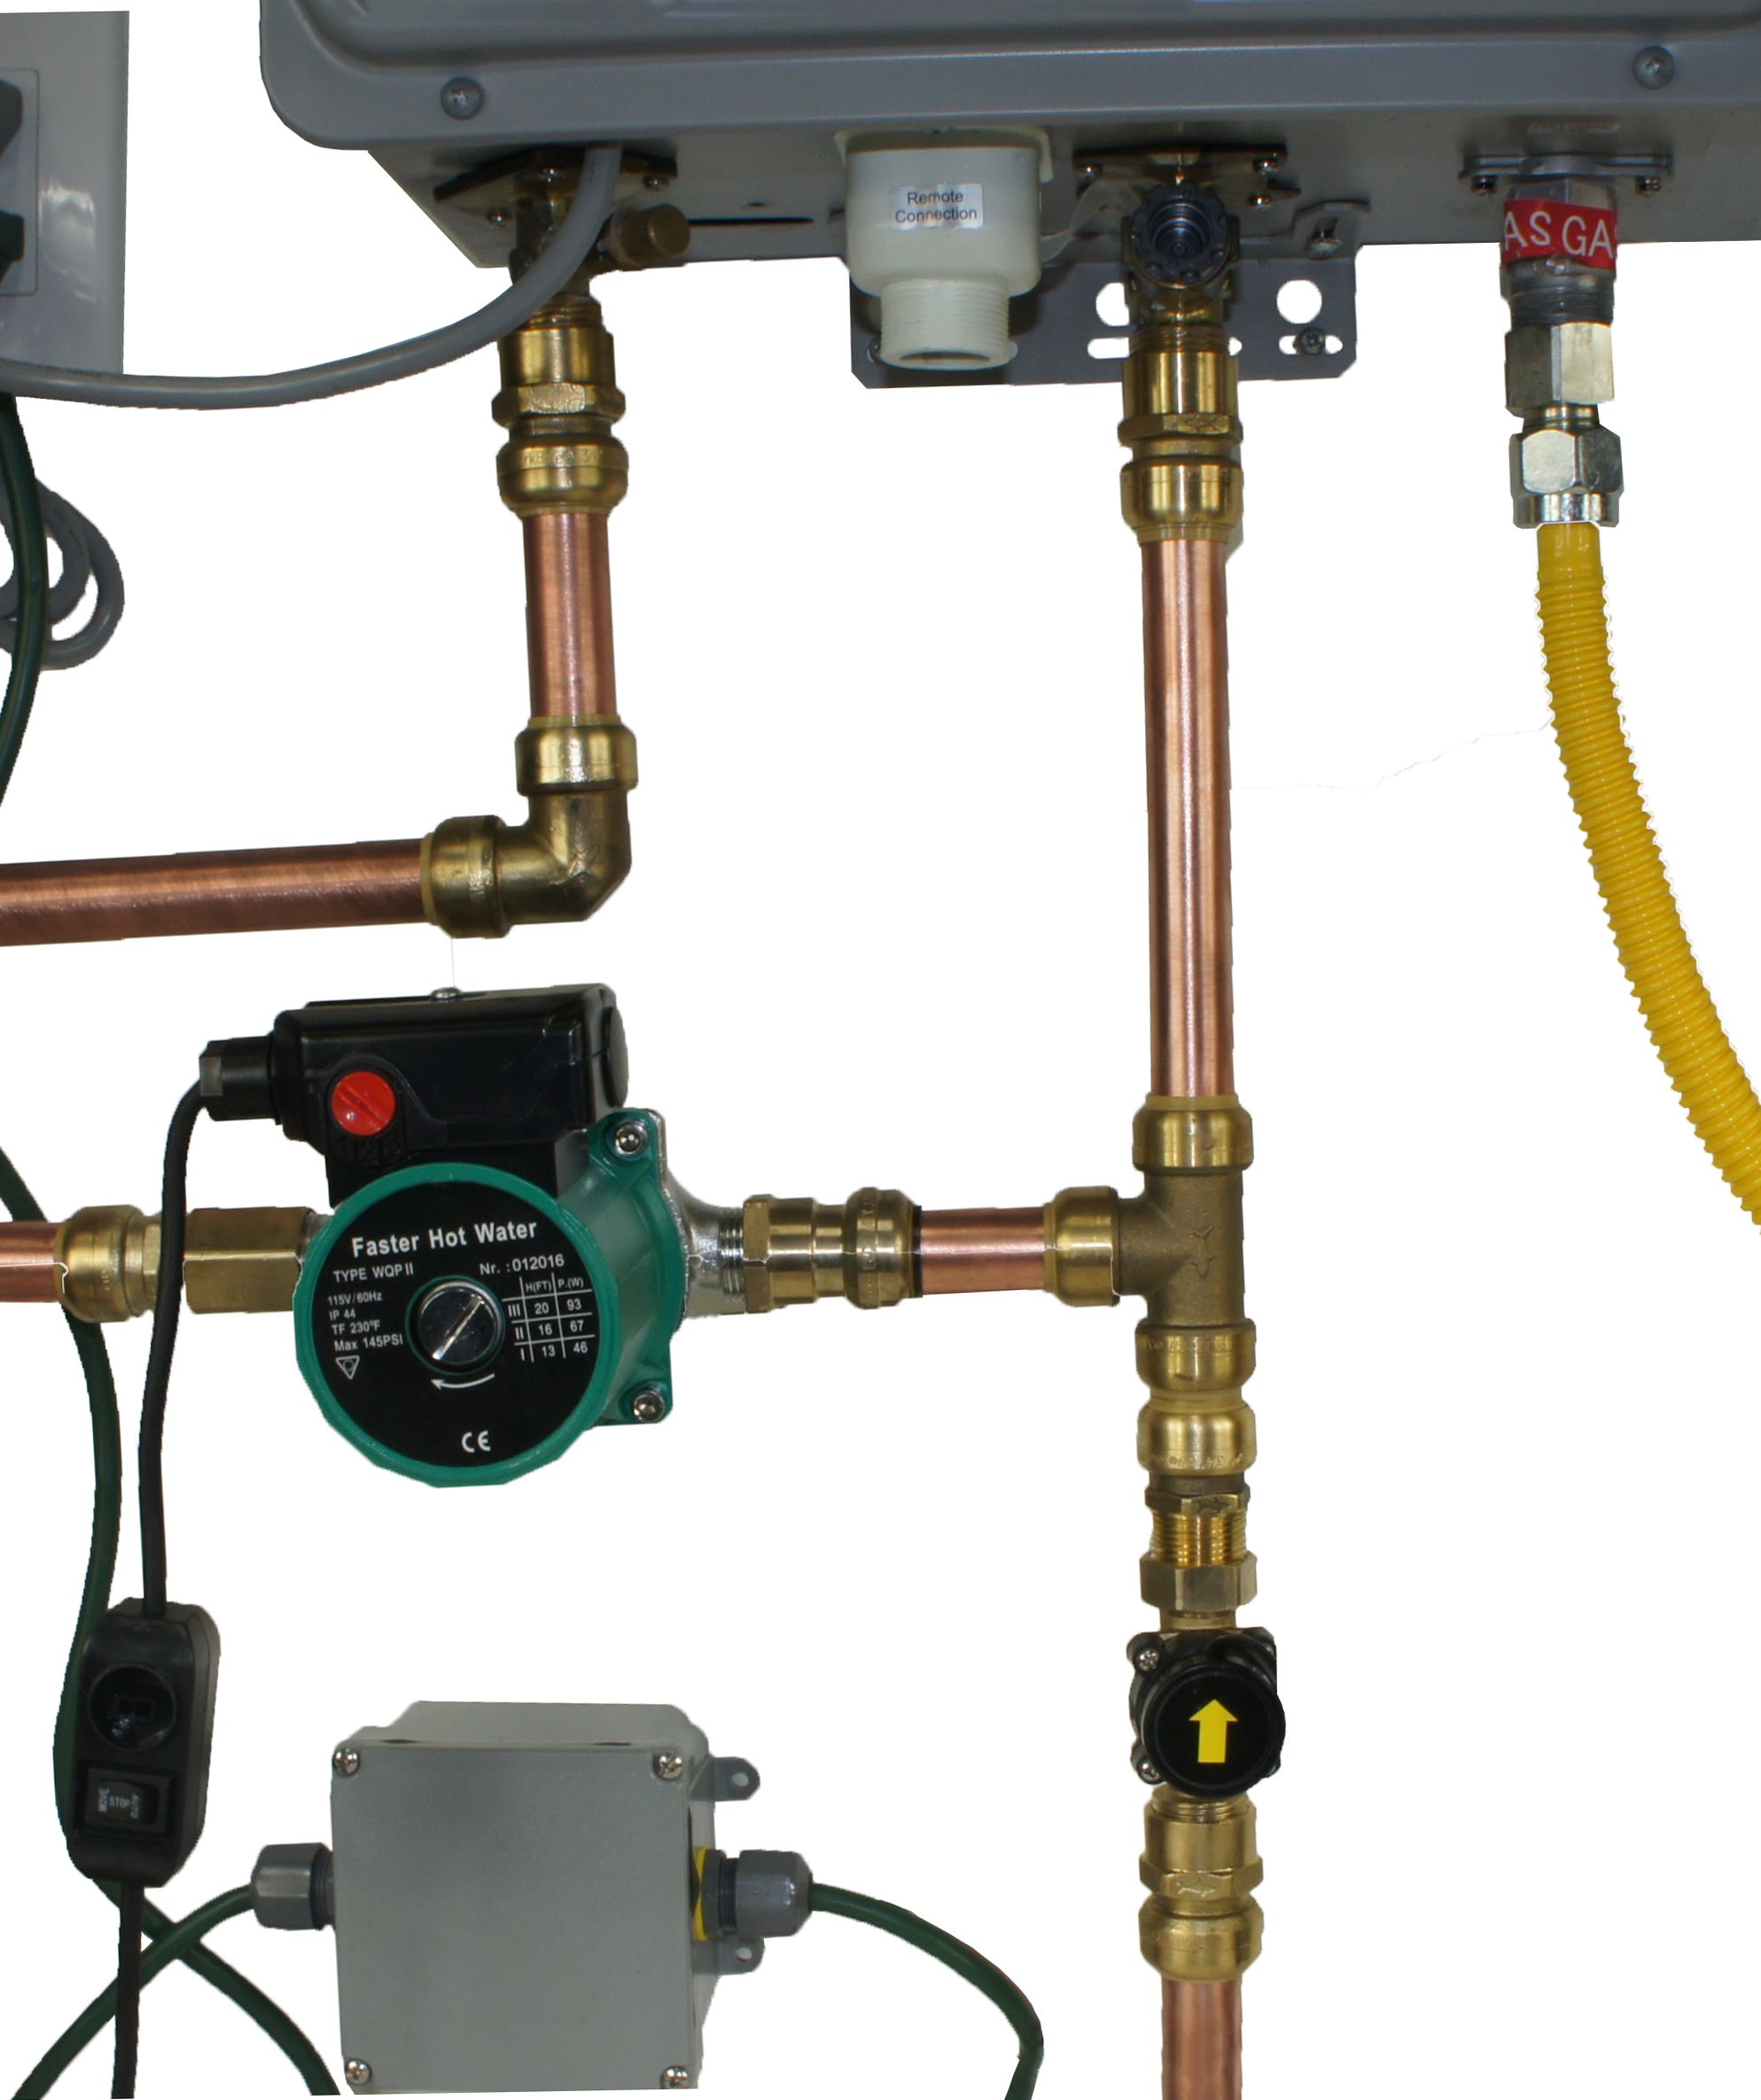 How To Install Recirculating Pump On Tankless Water Heater?  